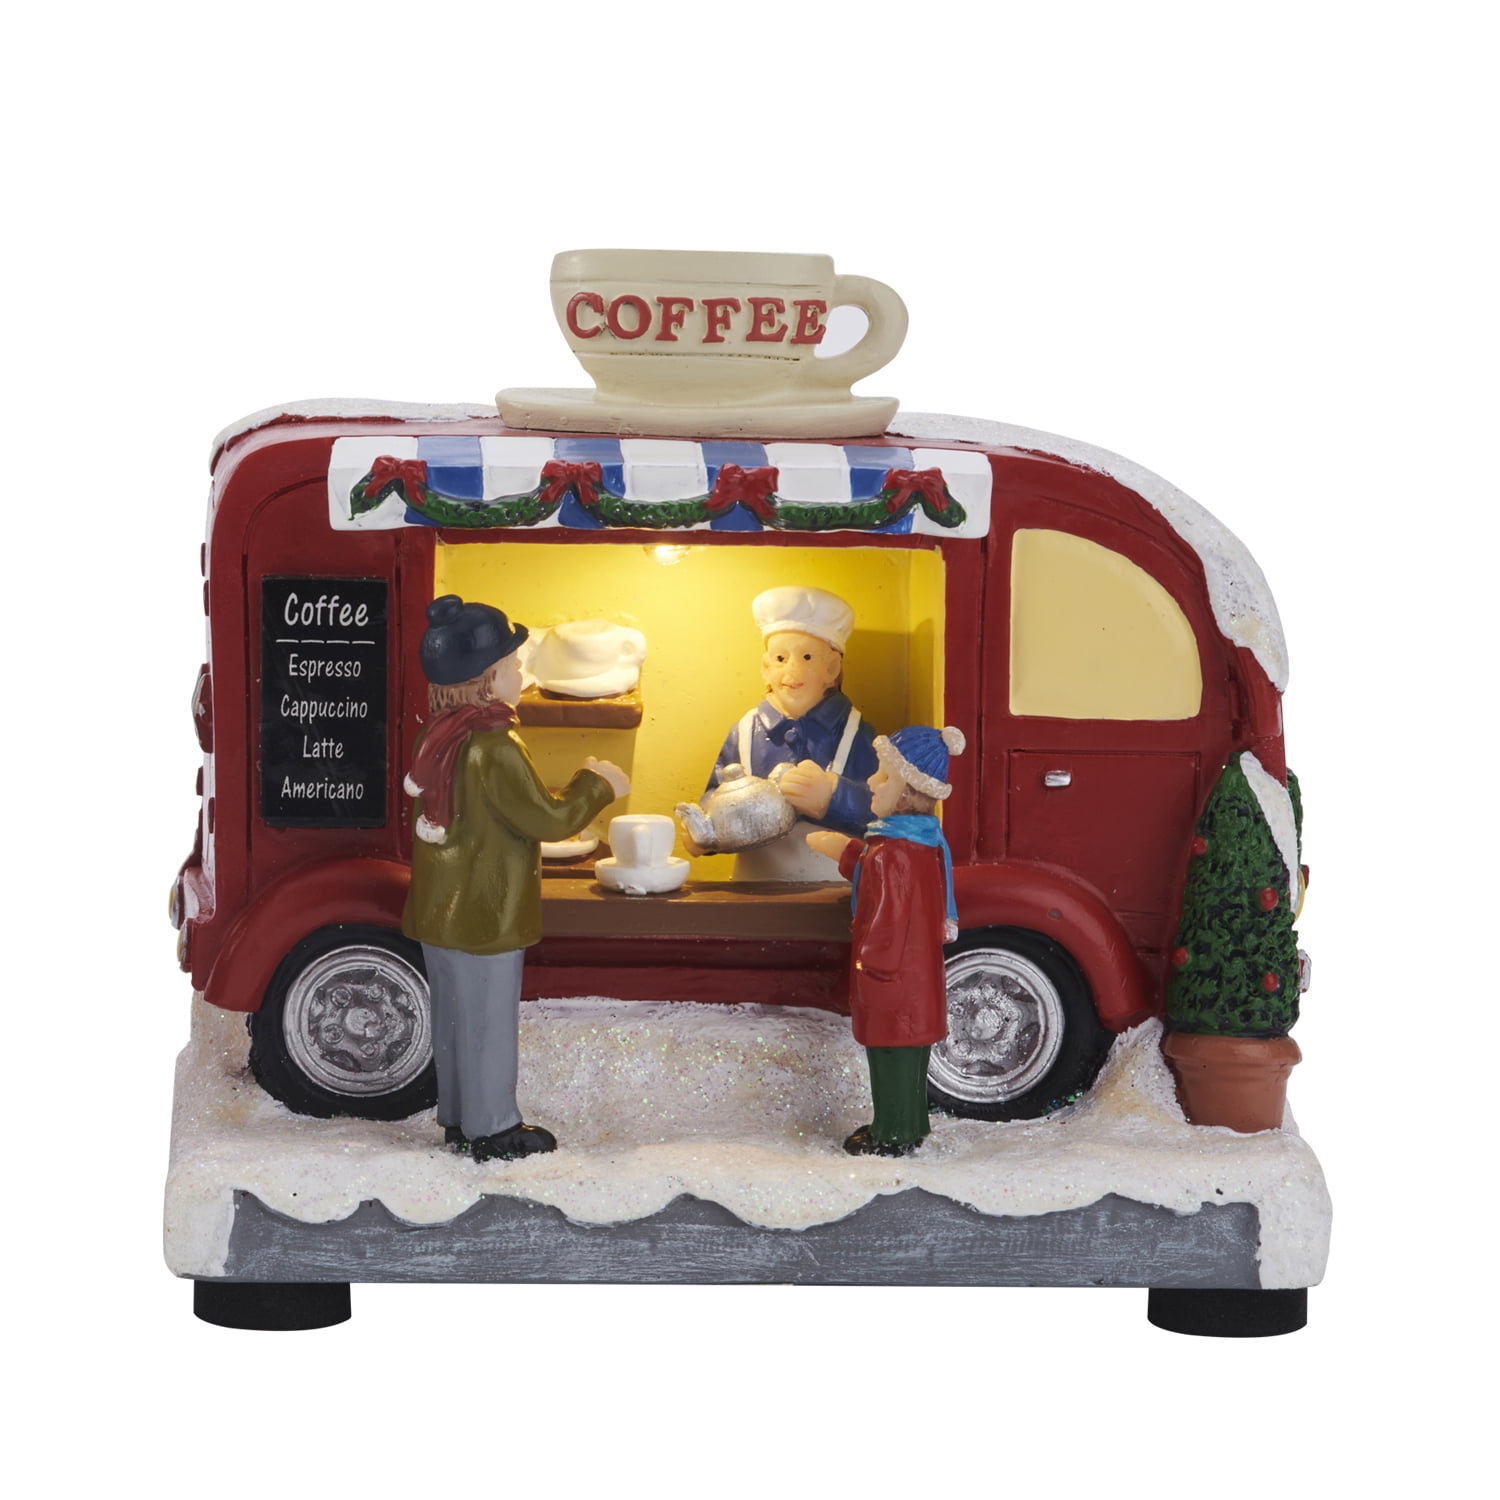 Holiday Time 3.9"H Christmas Village Food Truck Street Vendor, Coffee Truck with LED Lights - Battery Operated (not included) (3.9"H x 4.5"W x 3"D)